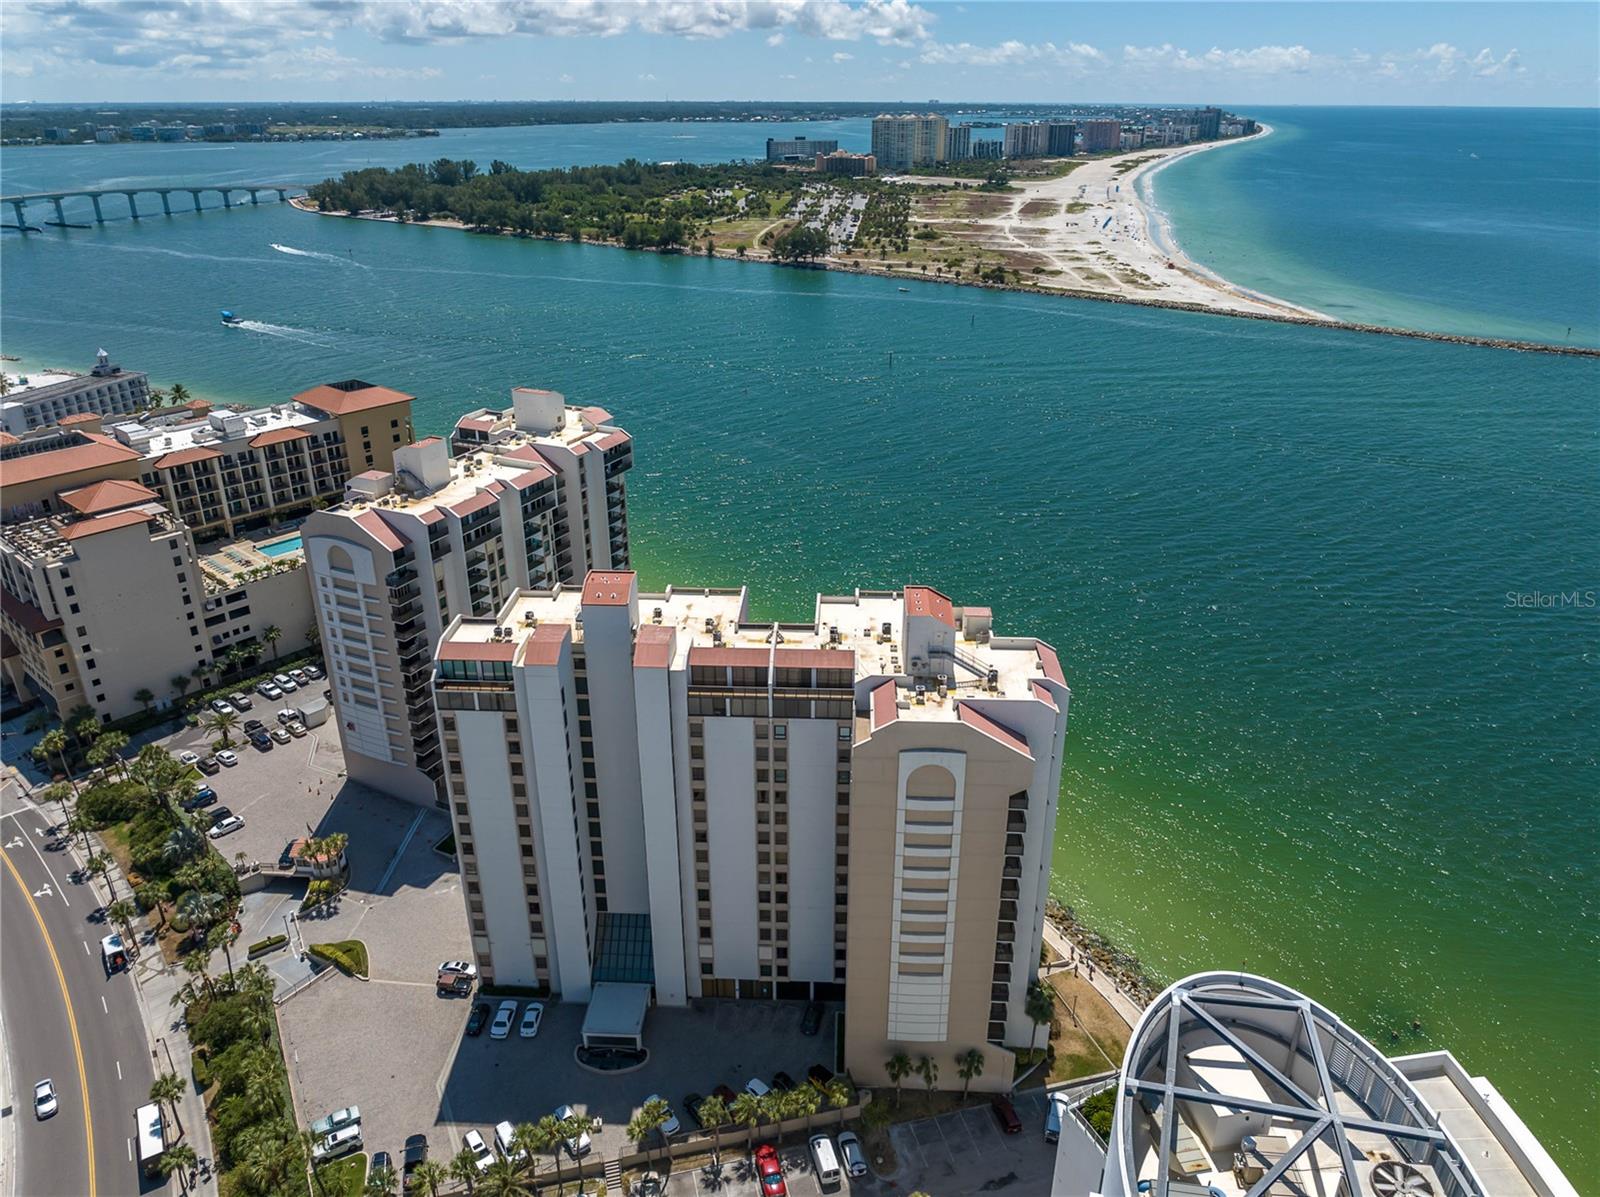 For sale: 440 S GULFVIEW BOULEVARD # 501, CLEARWATER FL 33767, CLEARWATER, FL